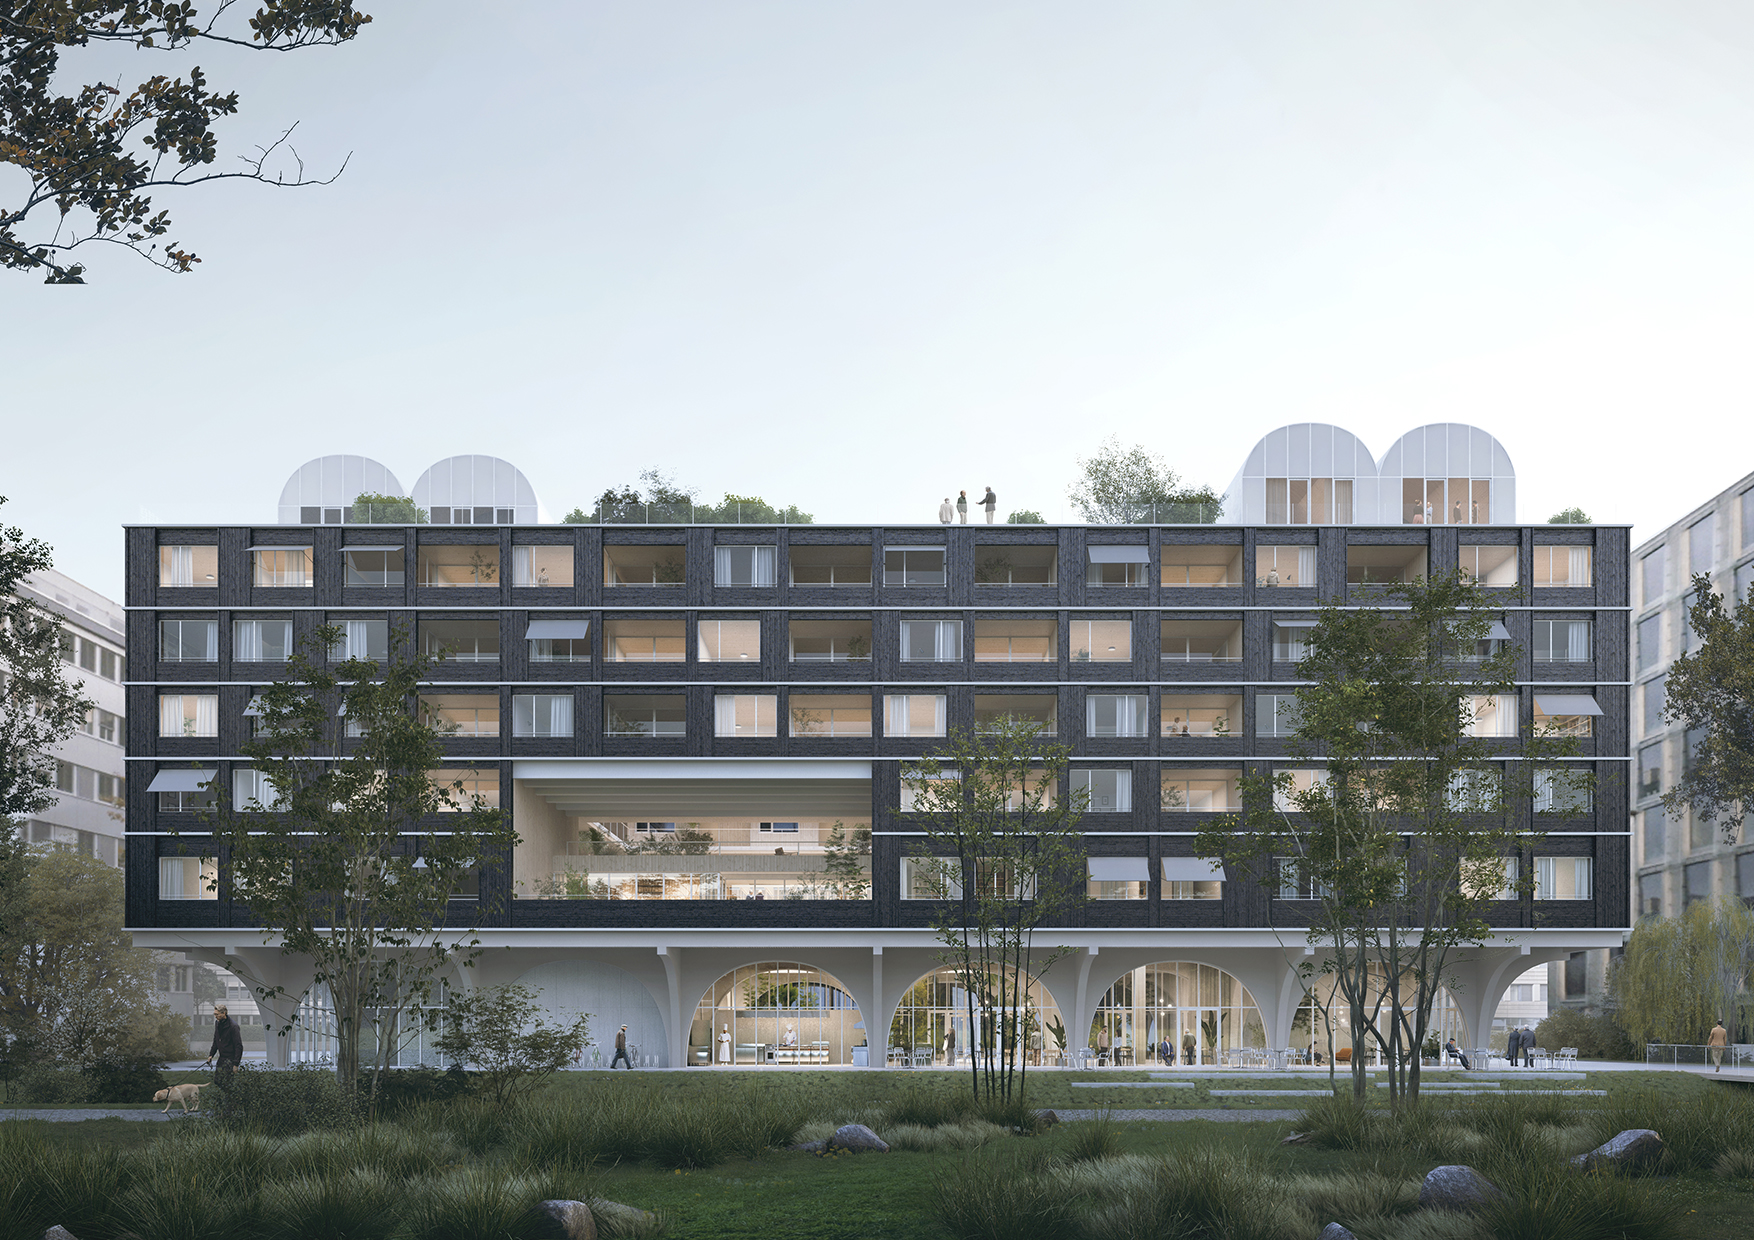 Hybrid building 'Oase Oerlikon' combines care and residential functions